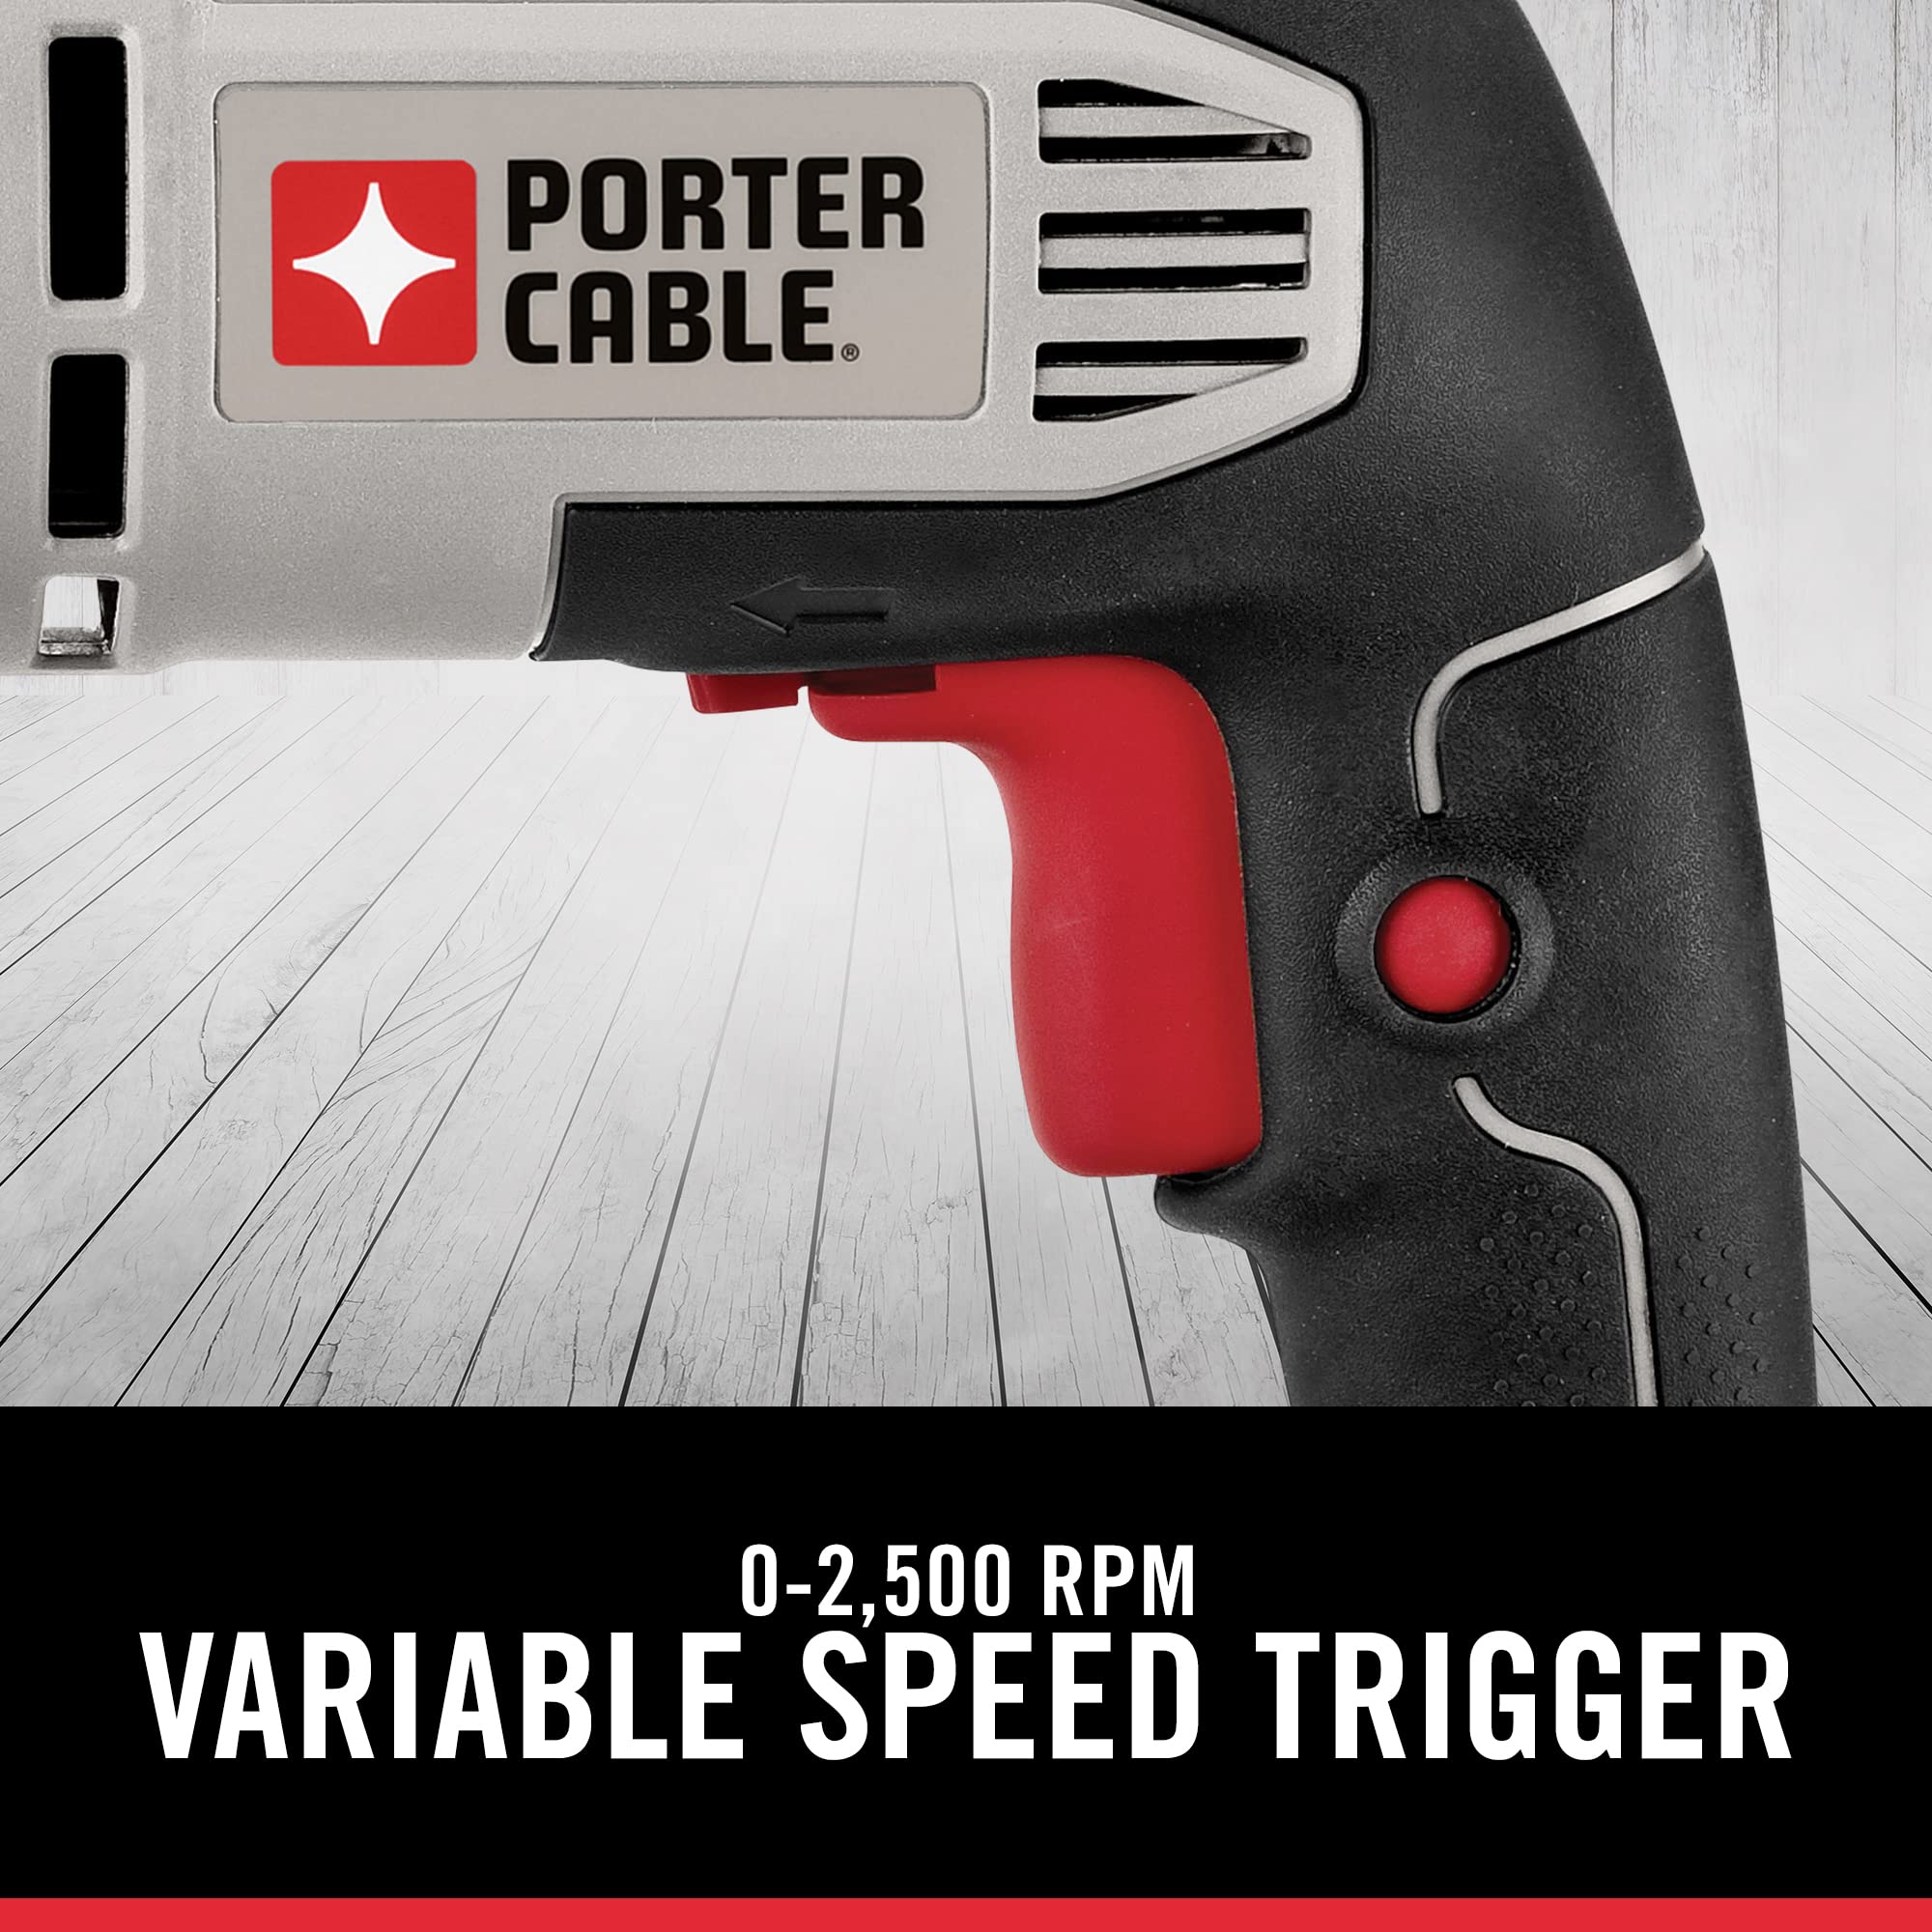 PORTER-CABLE Corded Drill, Variable Speed, 6-Amp, 3/8-Inch (PC600D)